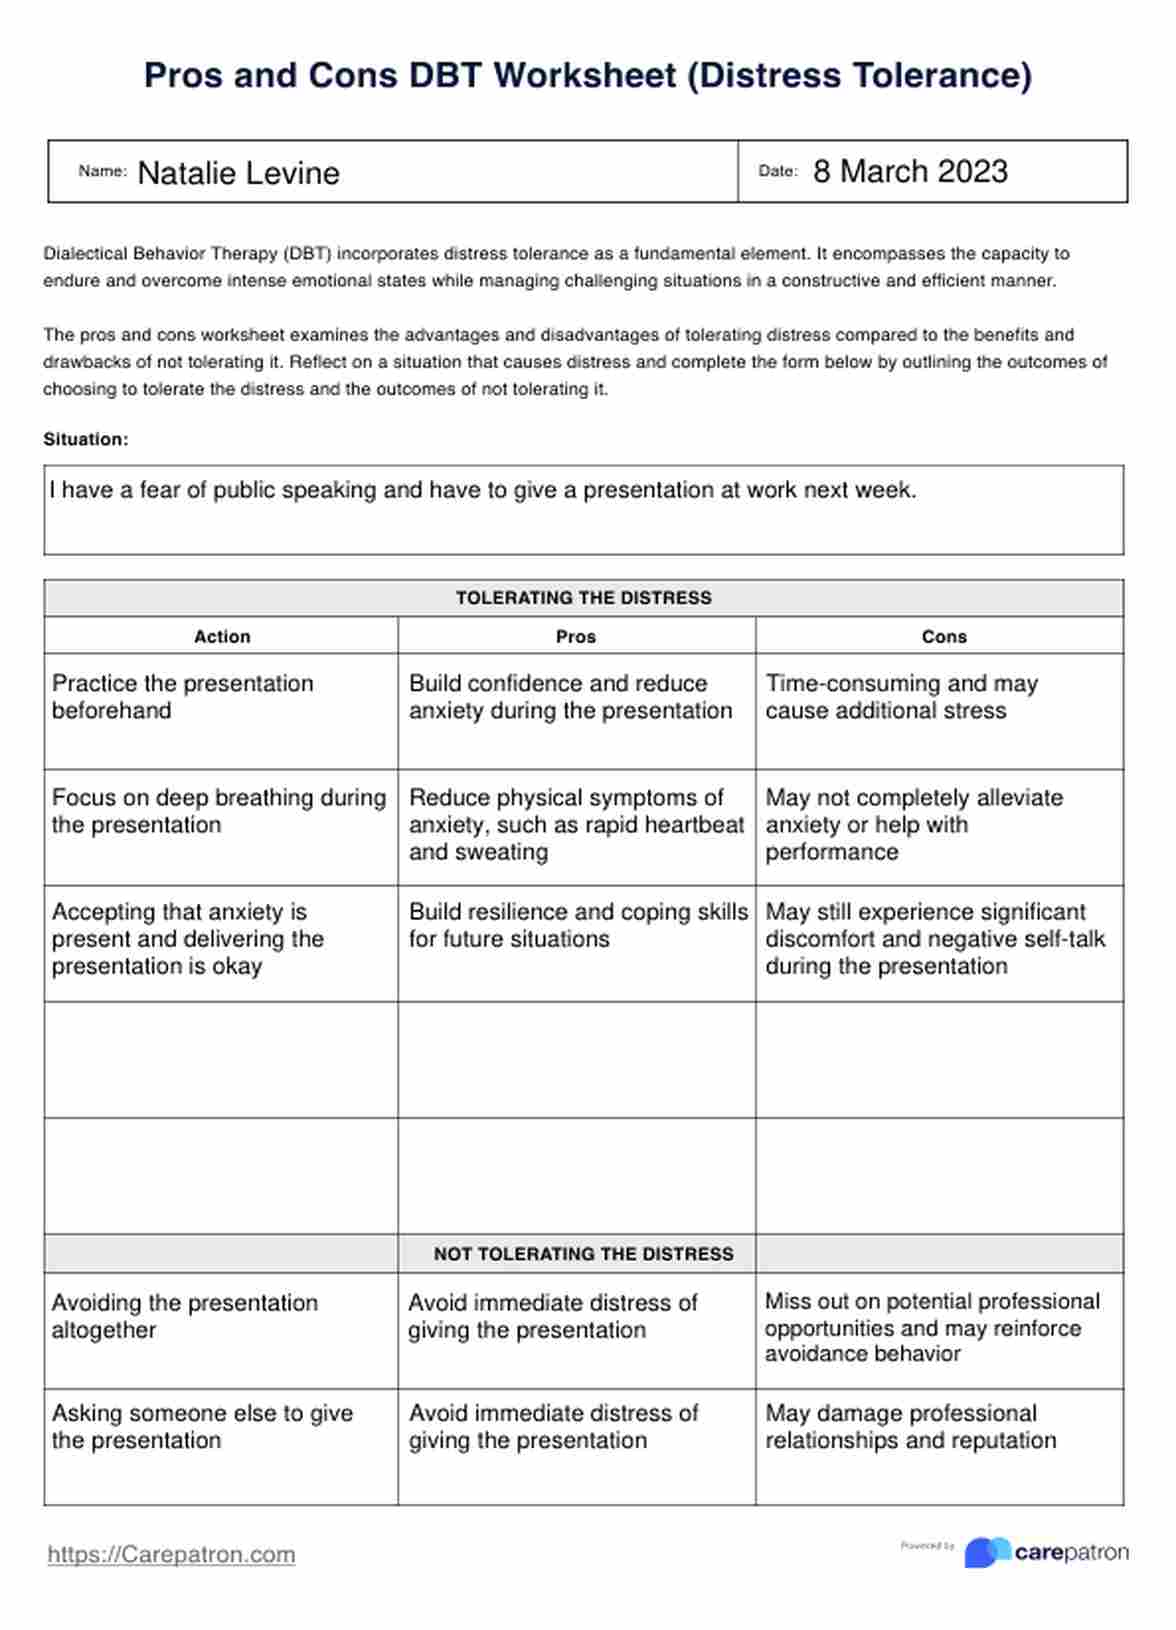 Pros and Cons DBT Worksheet PDF Example